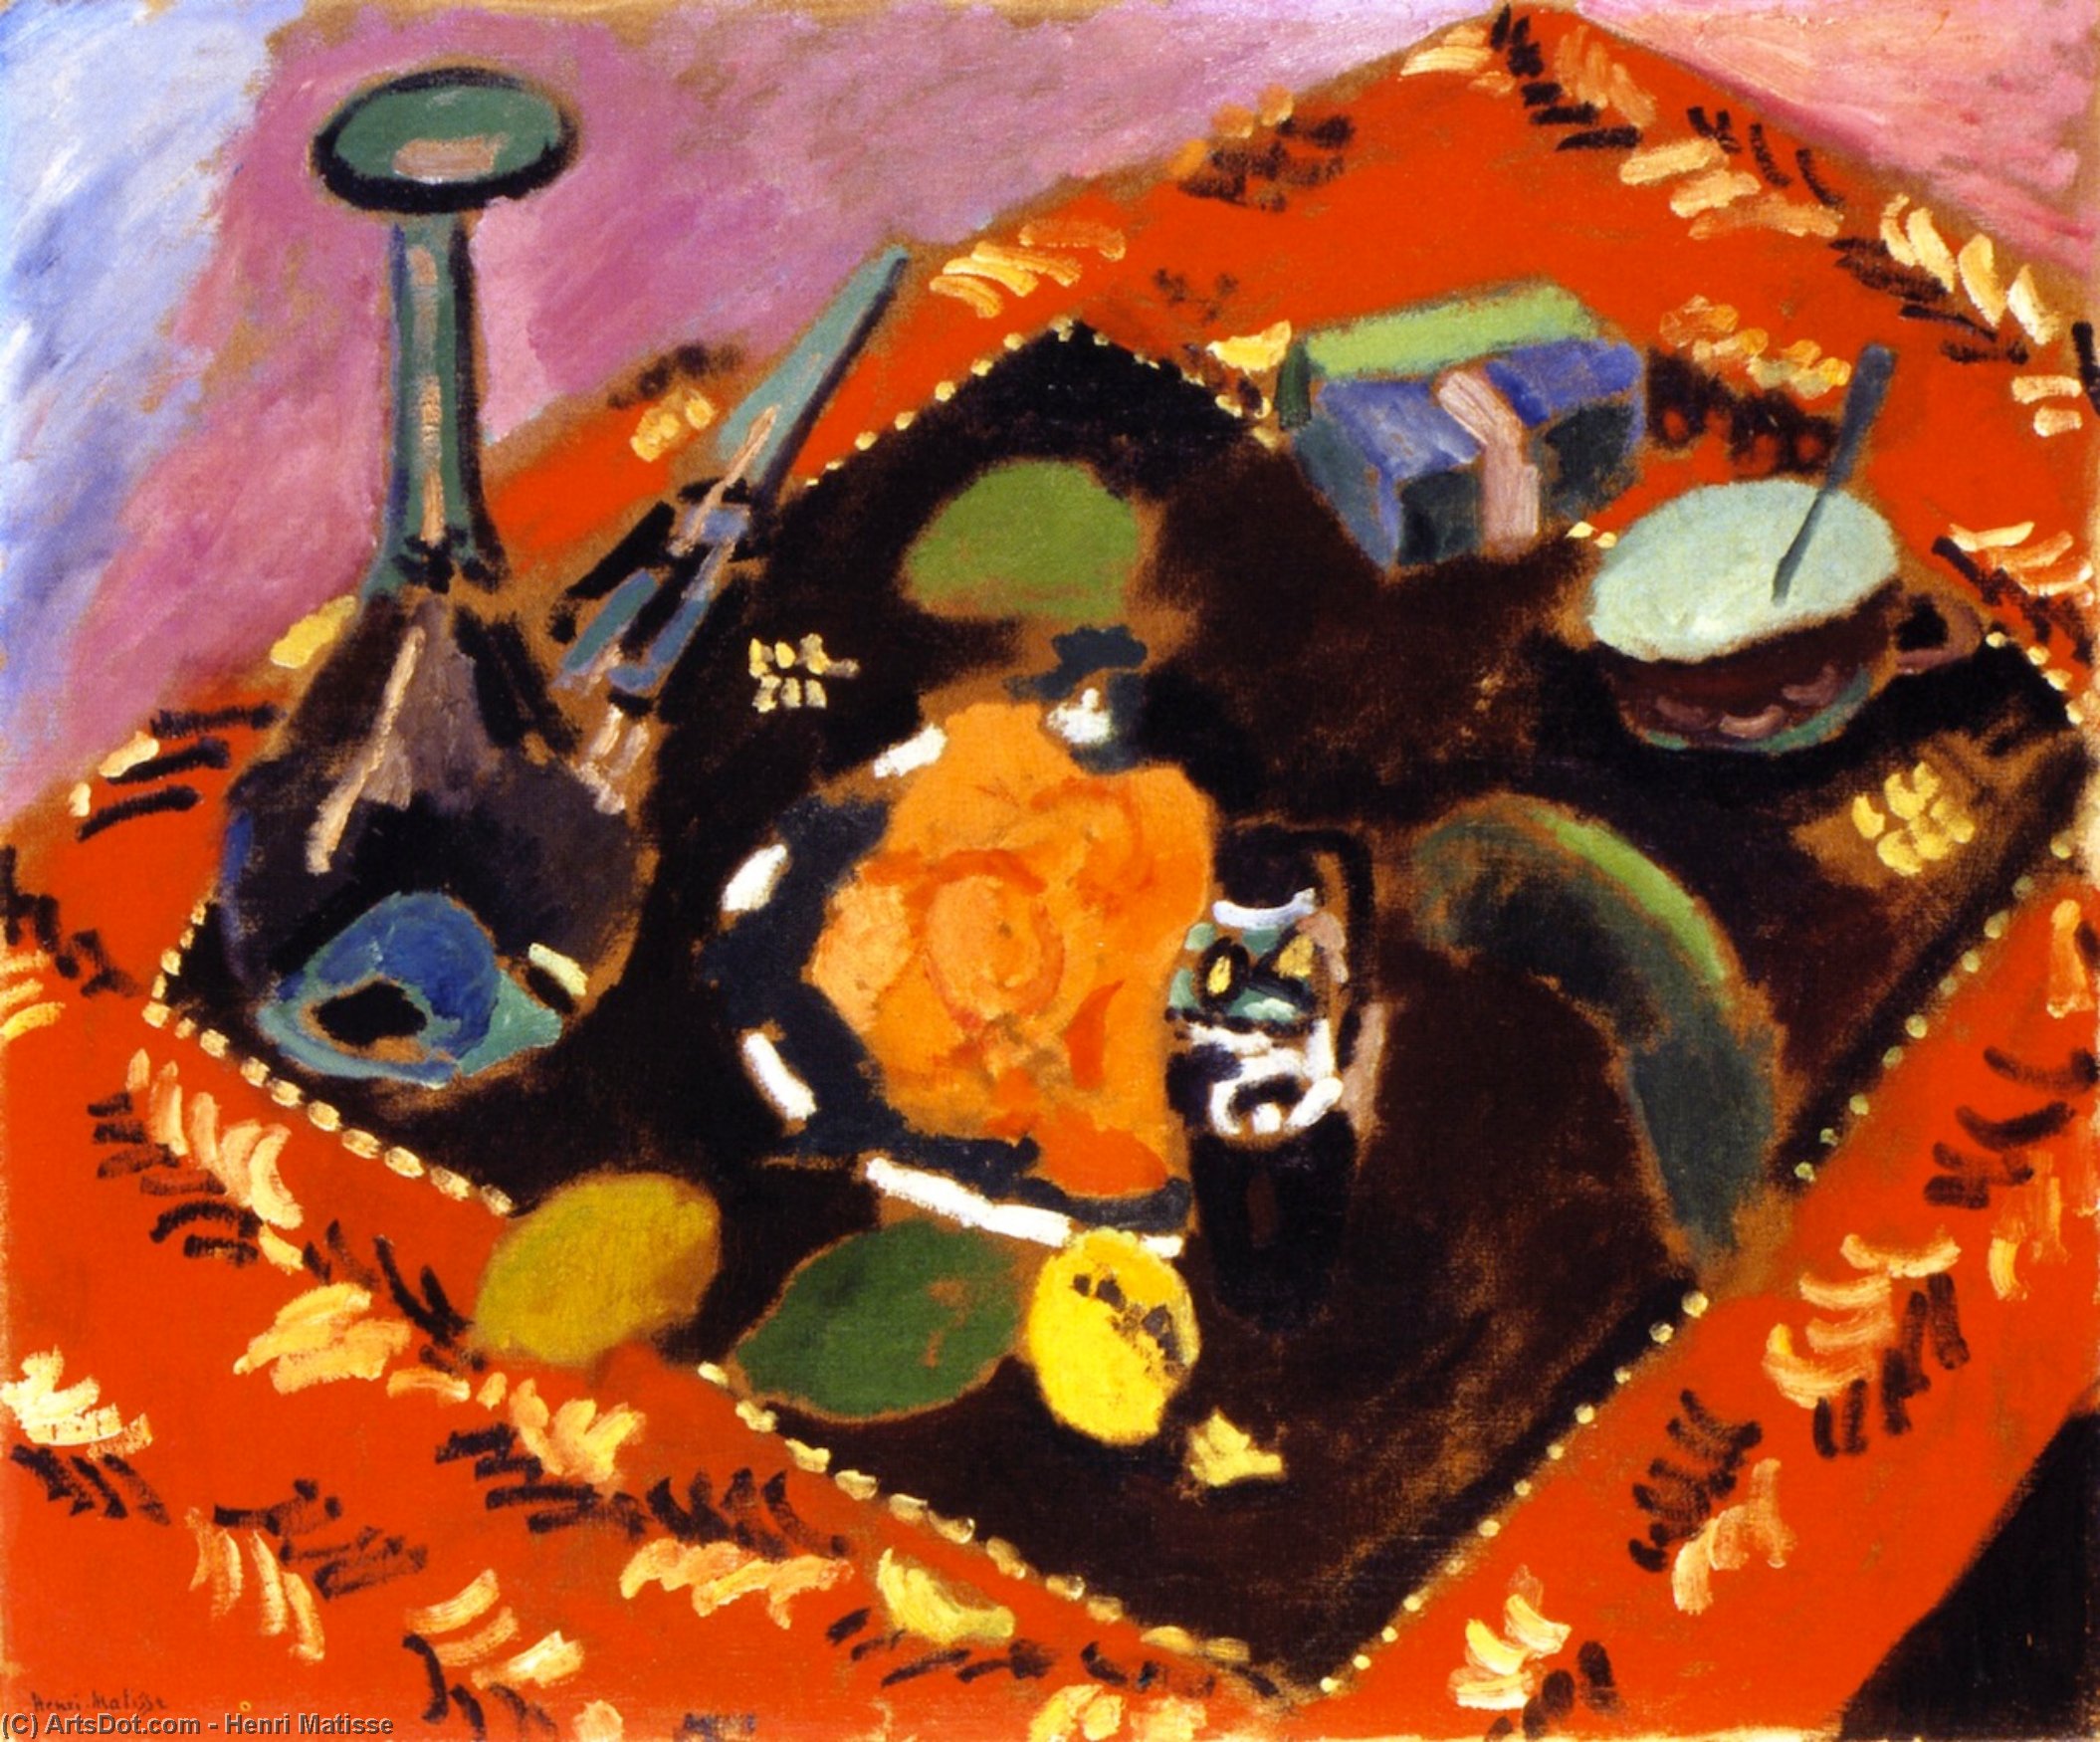 Wikoo.org - موسوعة الفنون الجميلة - اللوحة، العمل الفني Henri Matisse - Dishes and Fruit on a Red and Black Carpet (also known as Le Tapis Rouge)